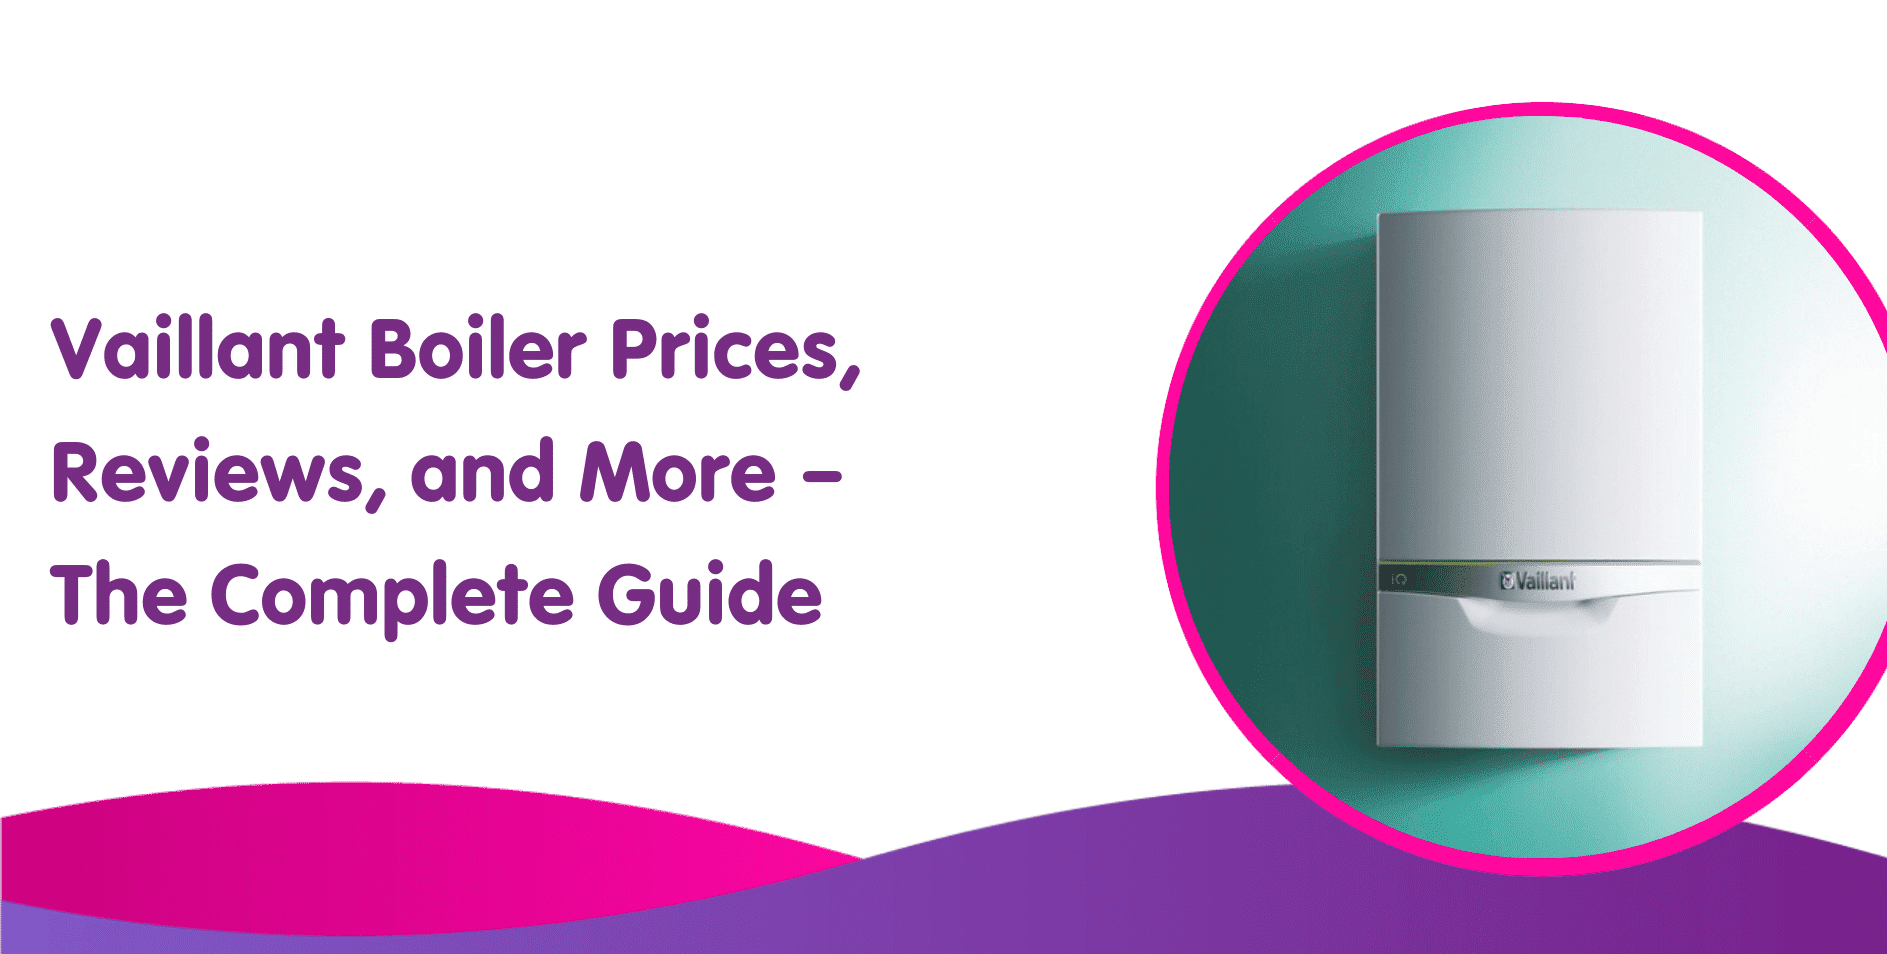 Vaillant Boiler Prices, Reviews, and More – The Complete Guide